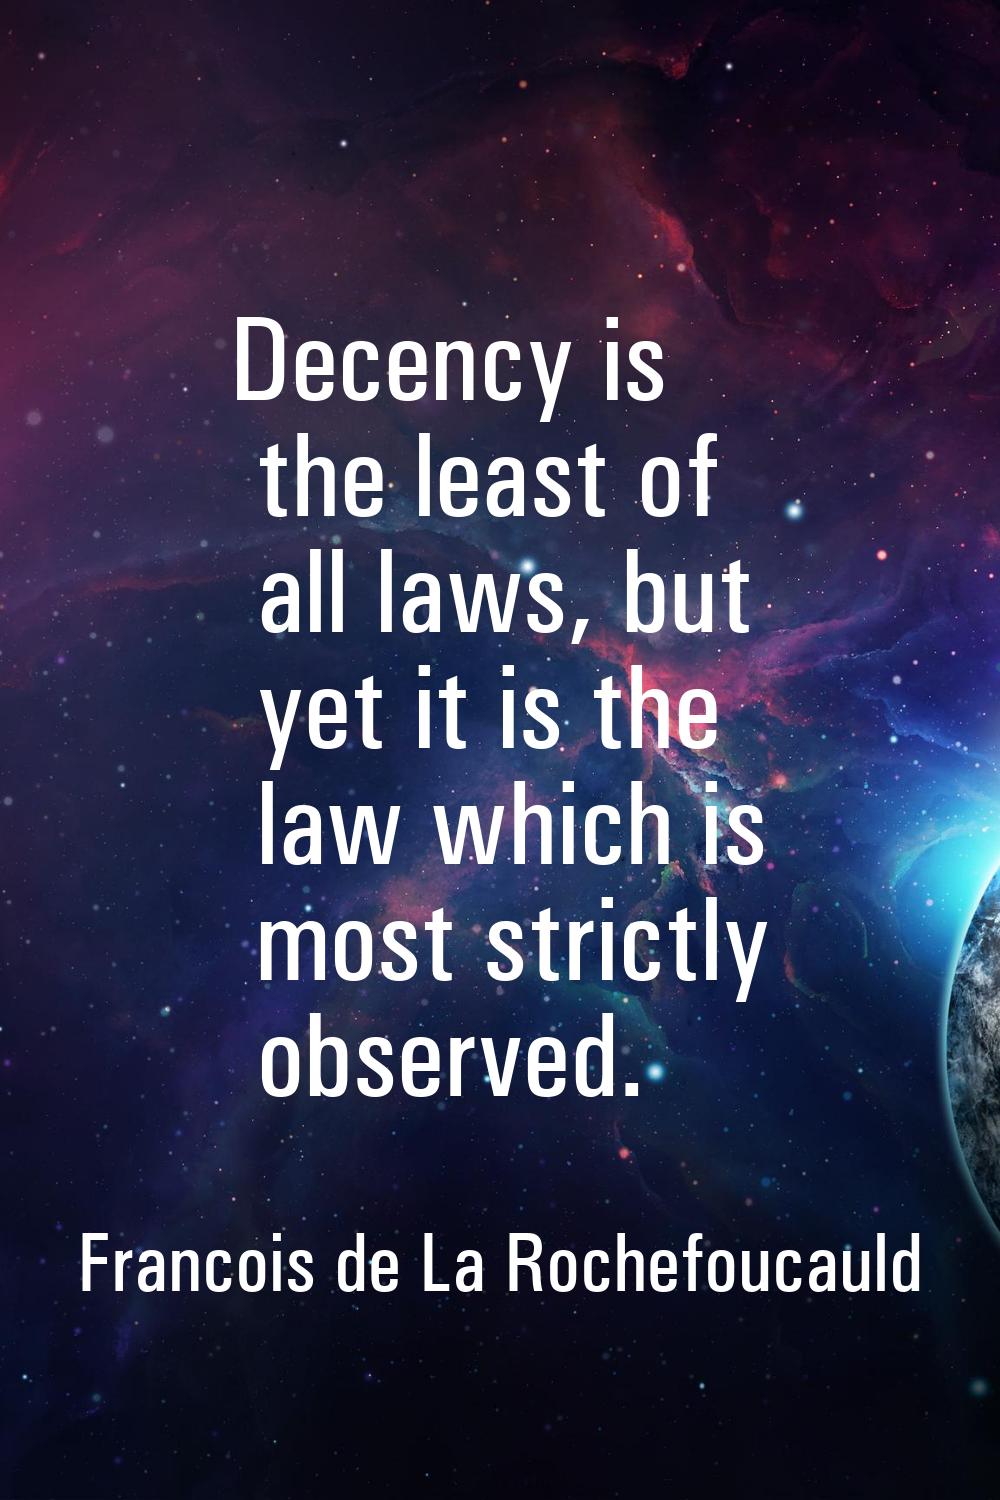 Decency is the least of all laws, but yet it is the law which is most strictly observed.